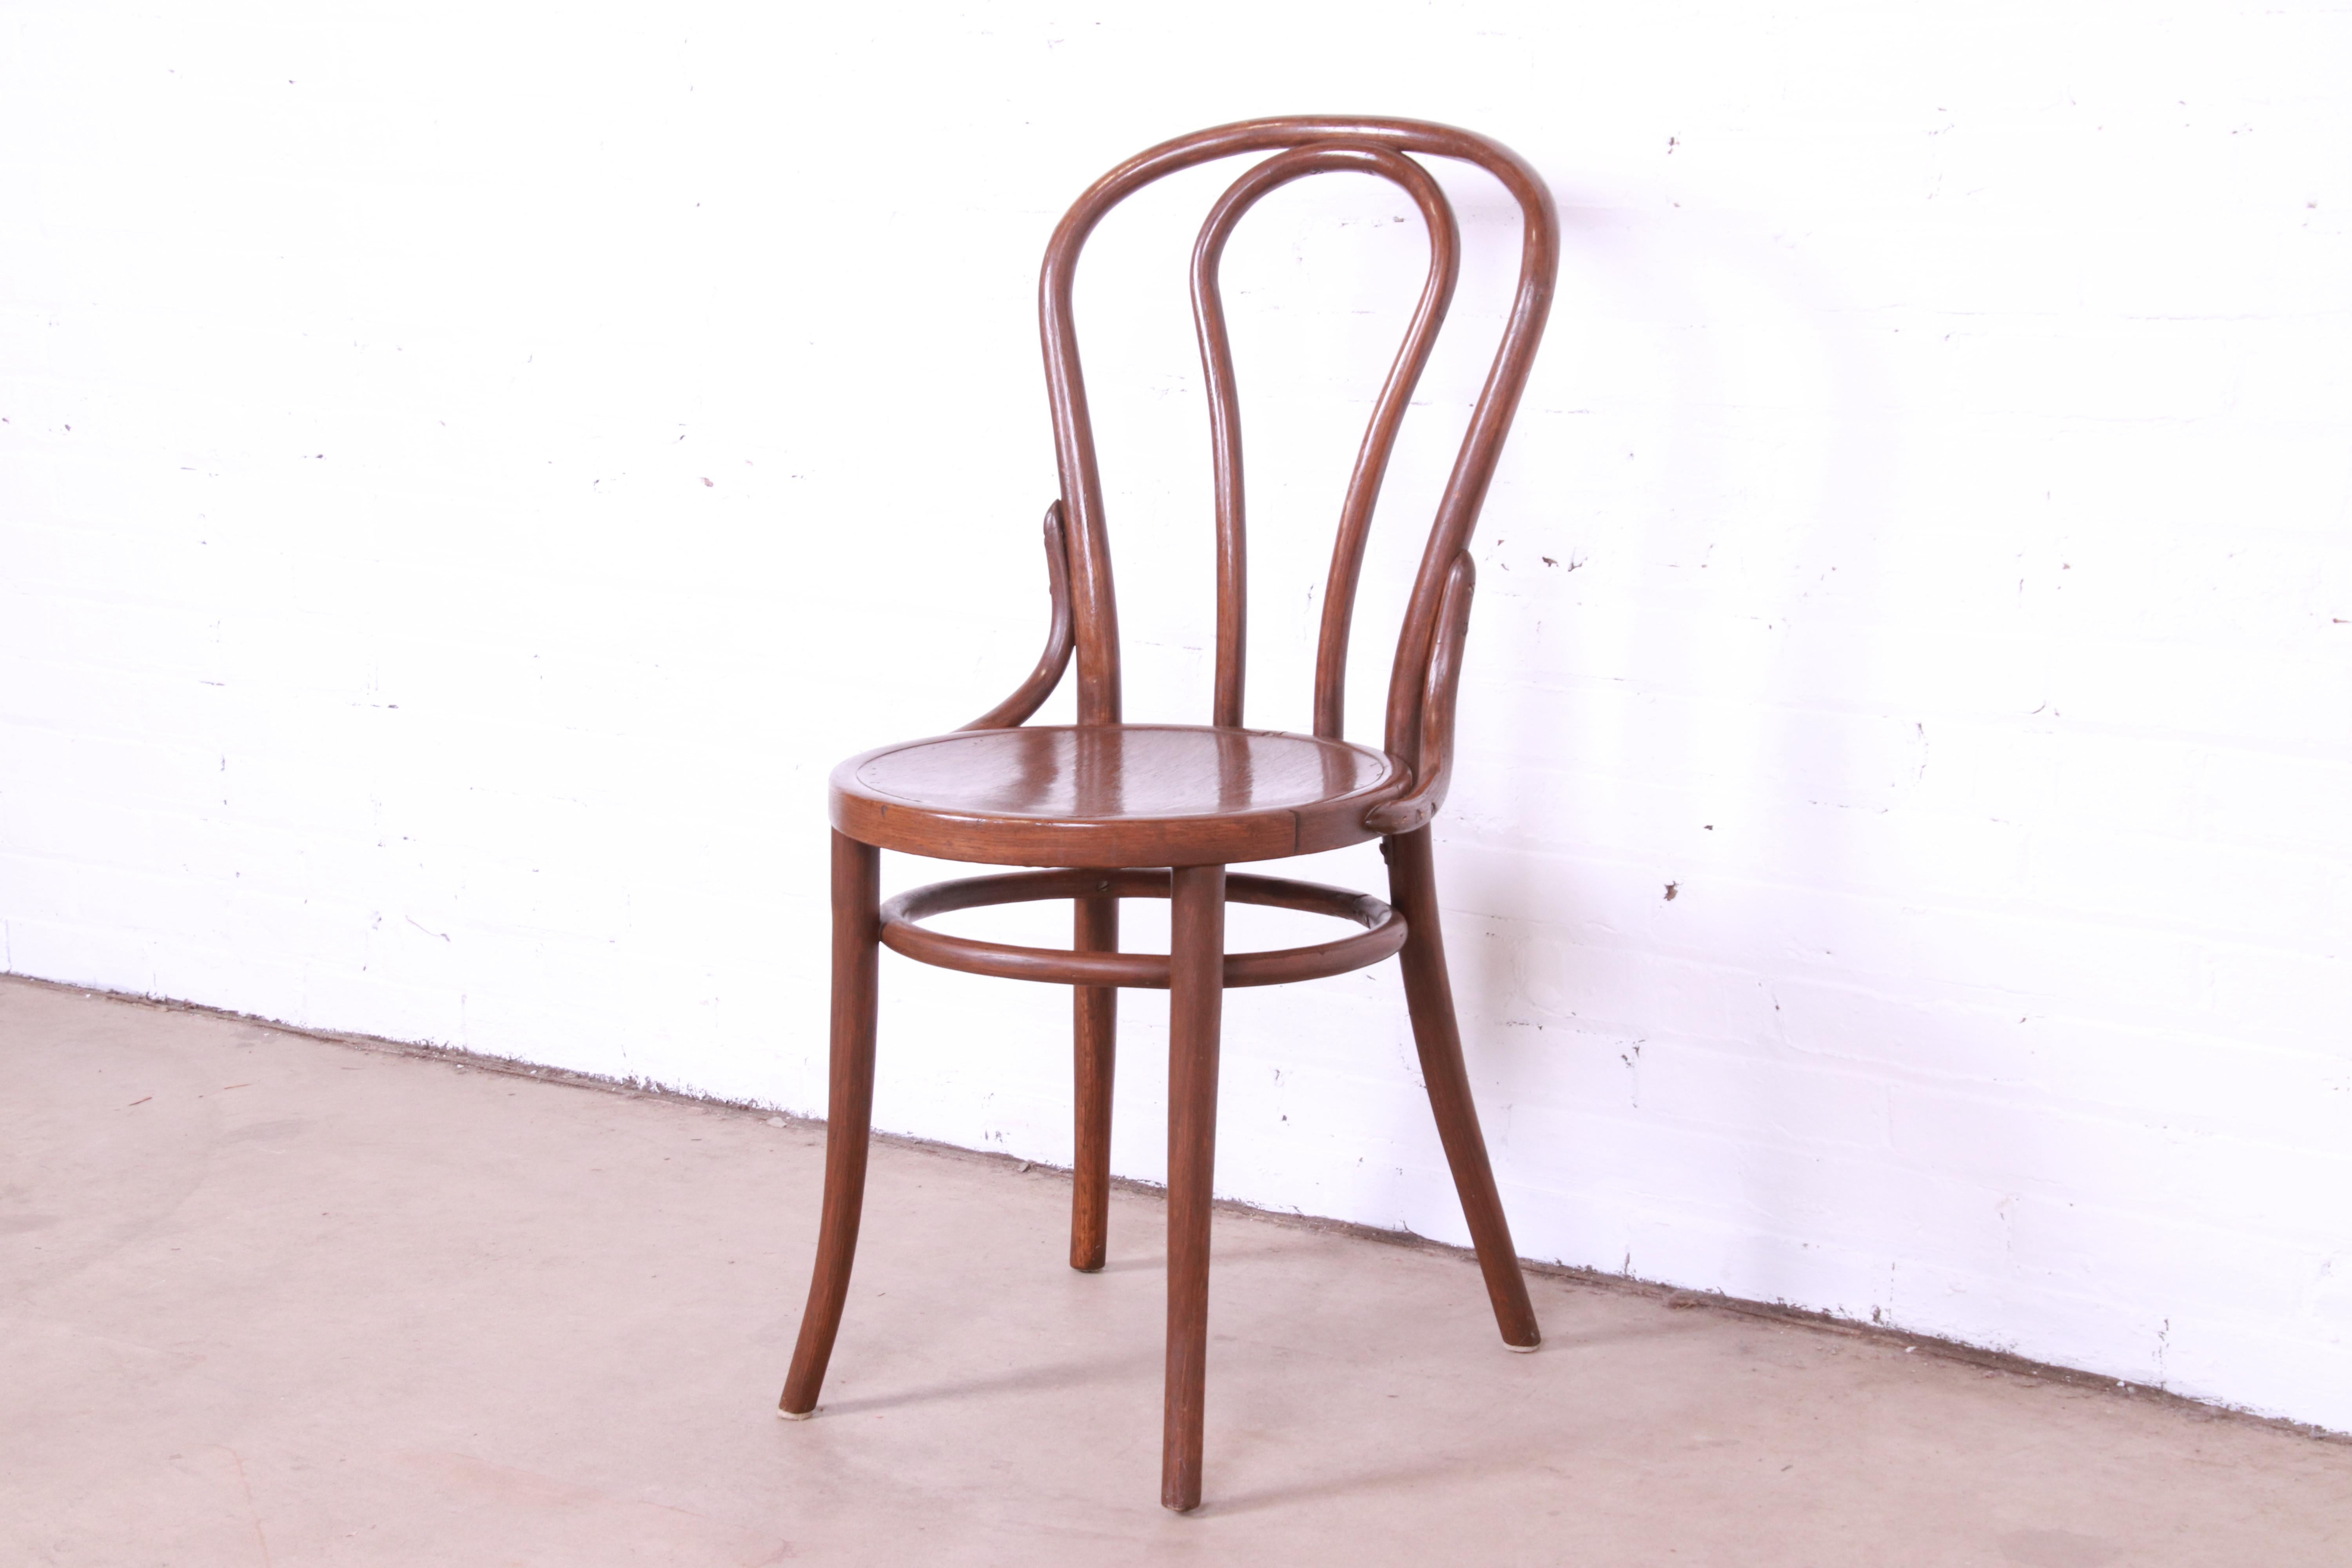 American Vintage Bentwood Desk Chair or Side Chair Attributed to Thonet